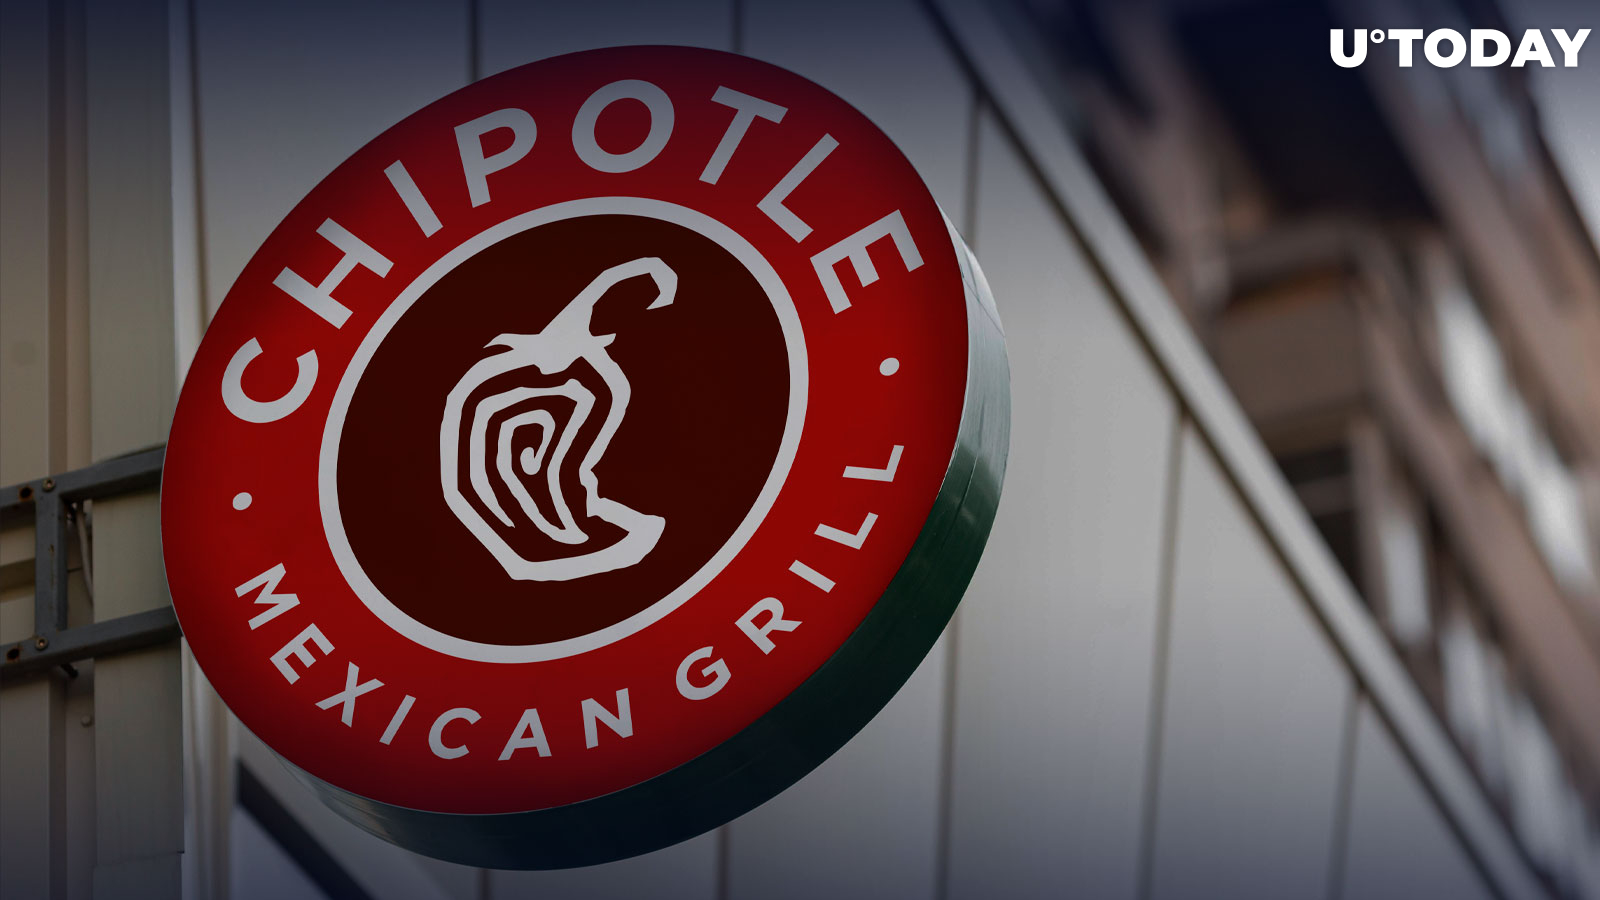 Chipotle Giving Away $200,000 in Dogecoin, Solana and Other Coins